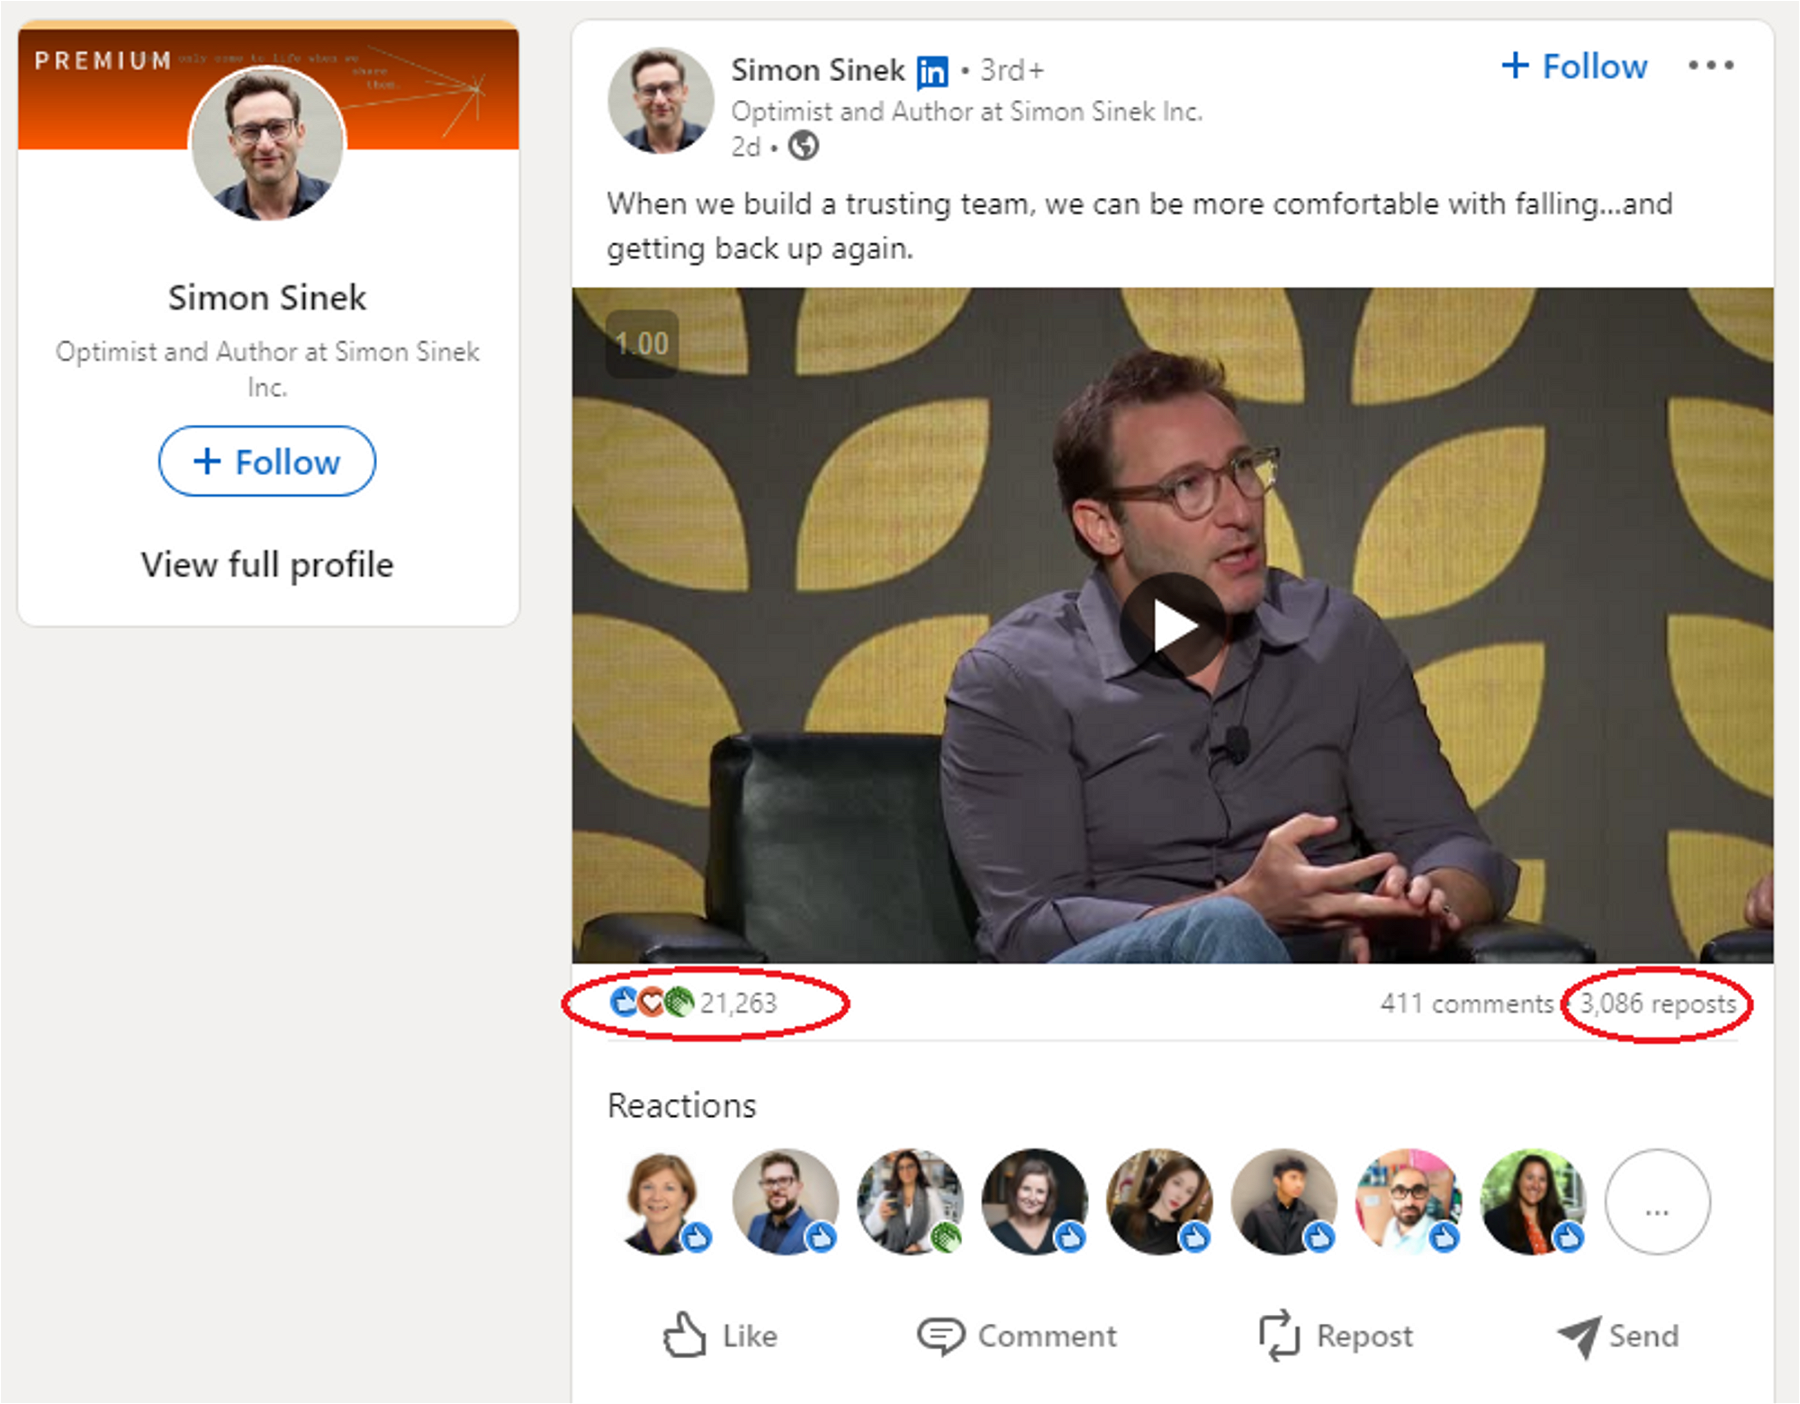 Simon Sinek repurposes videos from his conferences to improve the quality of his posts and help them go viral.